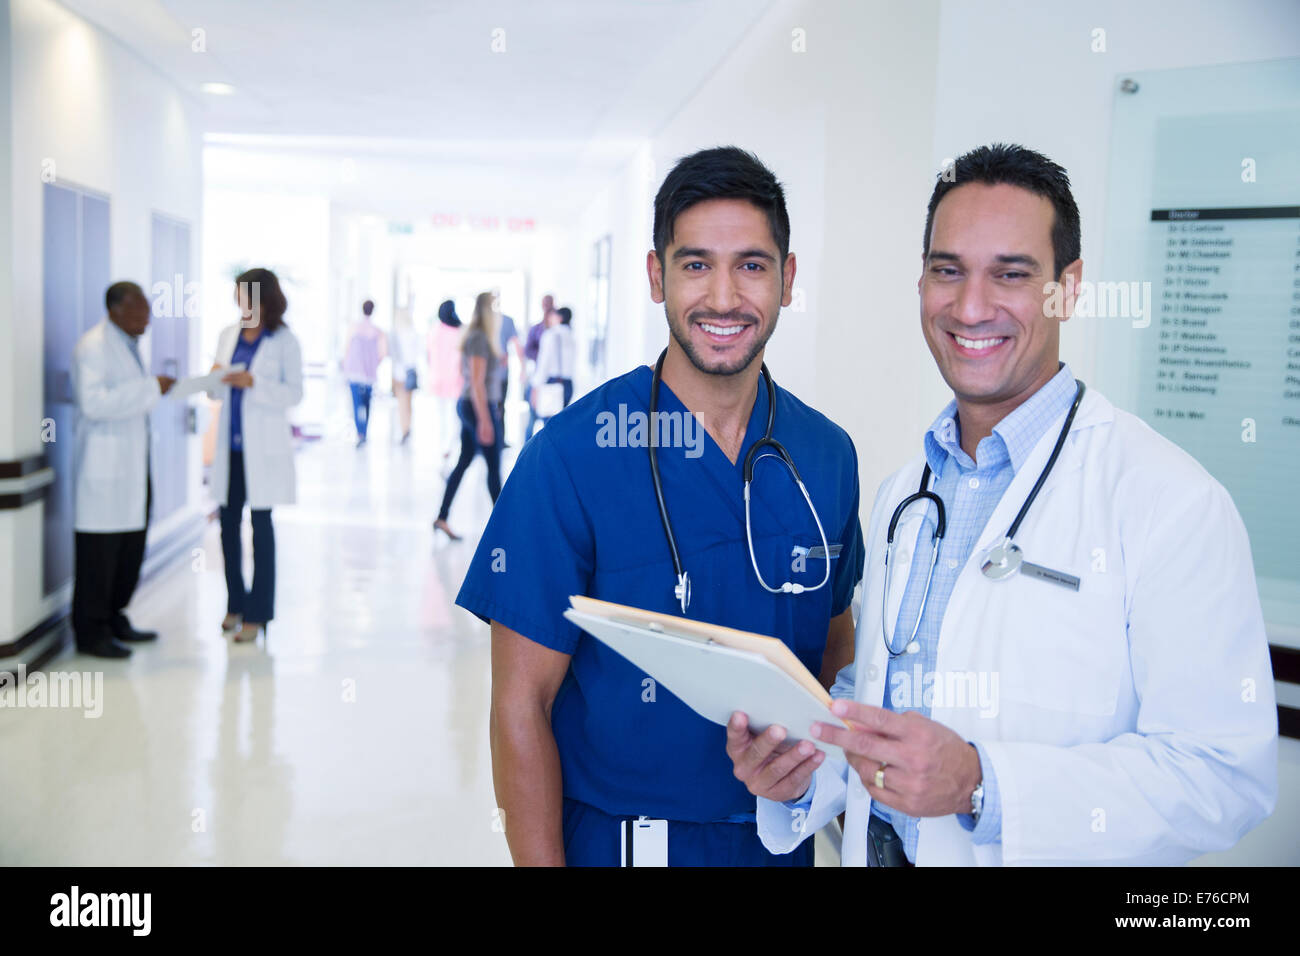 Doctor and nurse smiling in hospital hallway Stock Photo